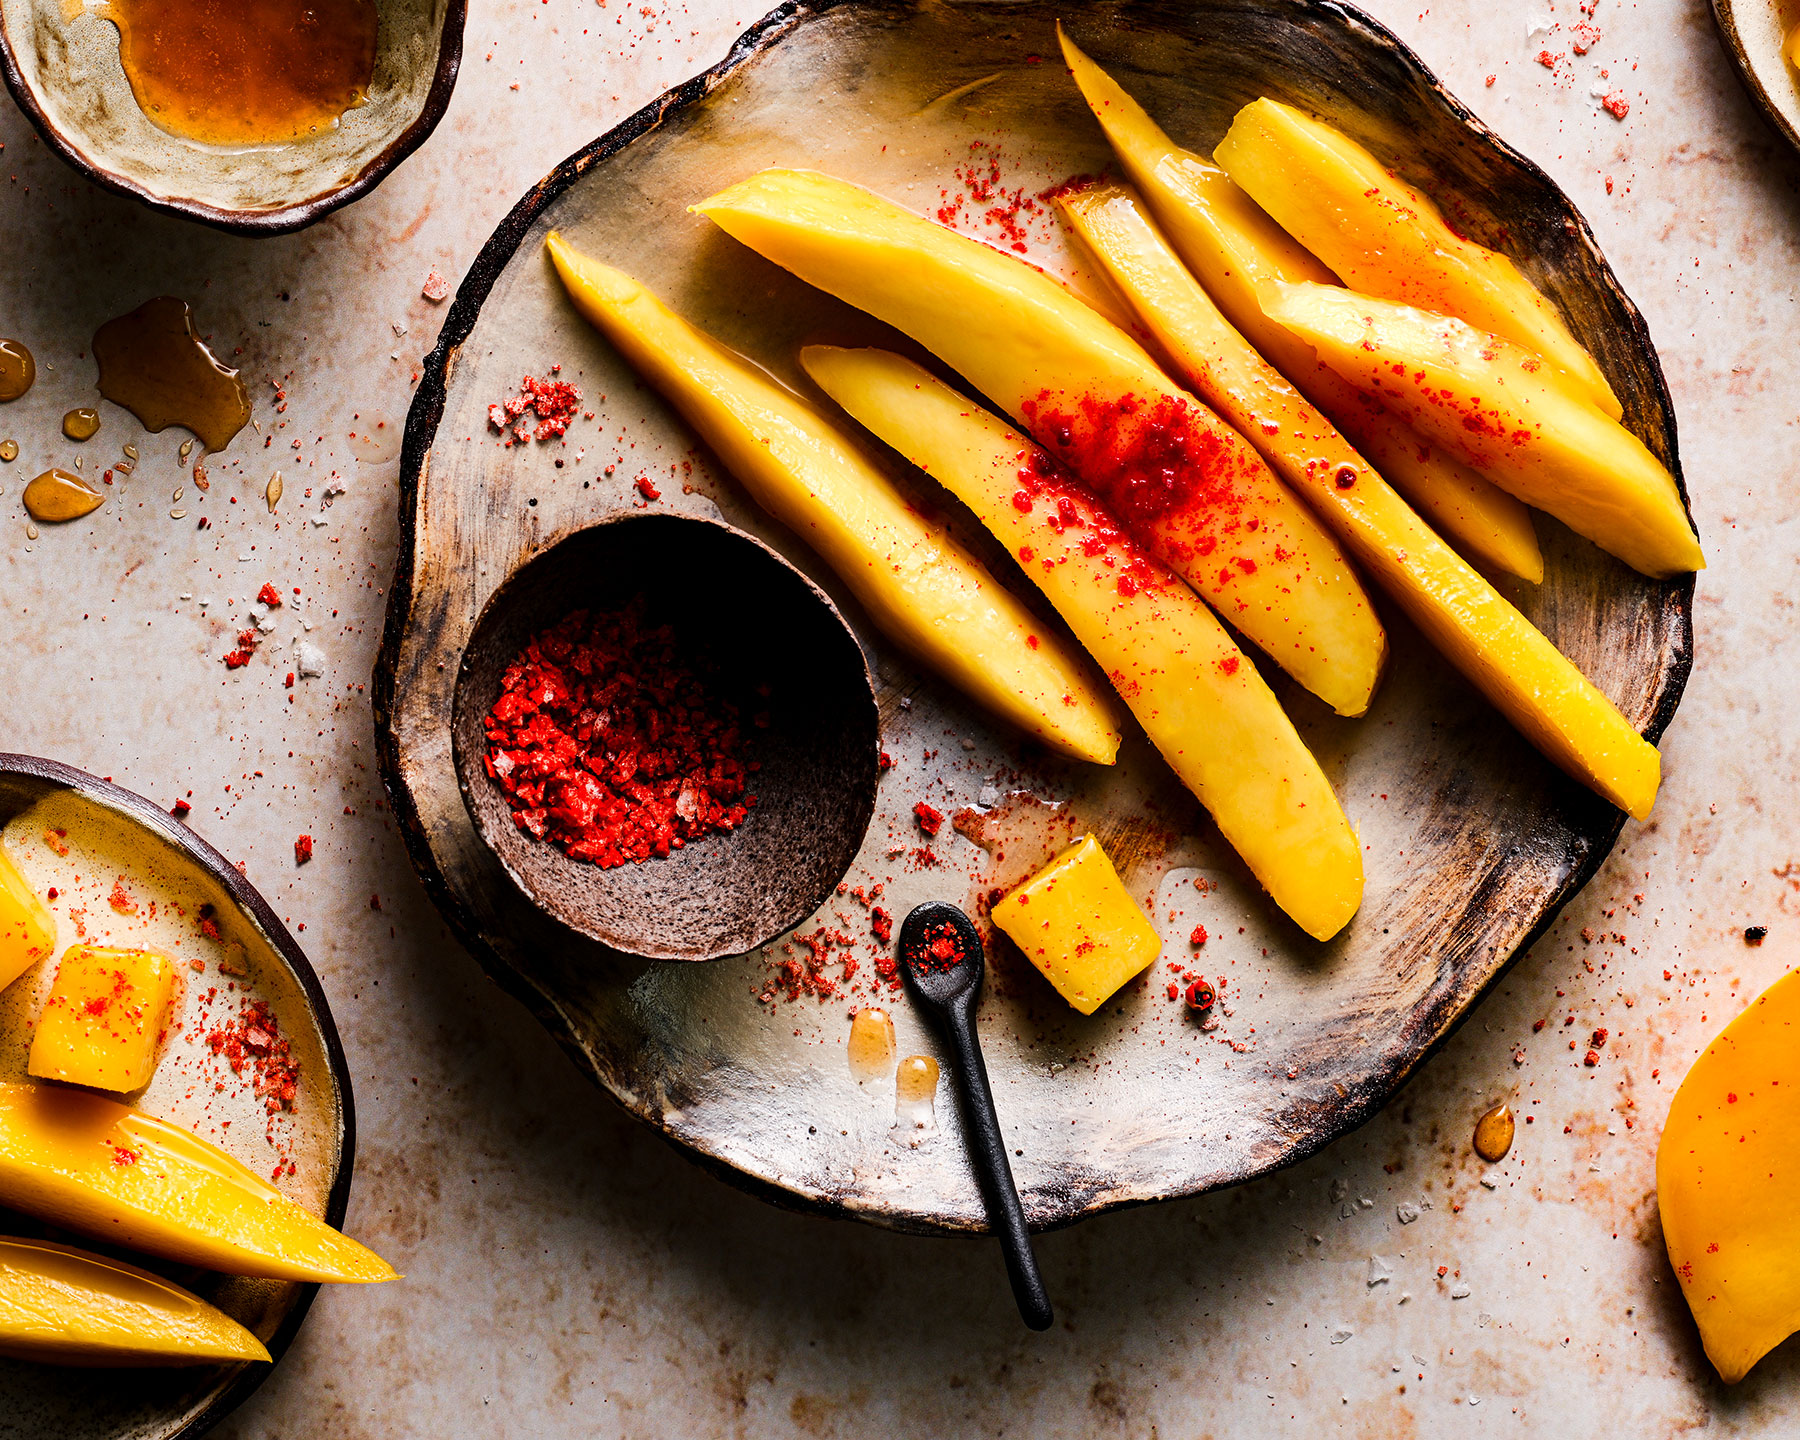 A picture of sliced mango with chili sprinkled on top